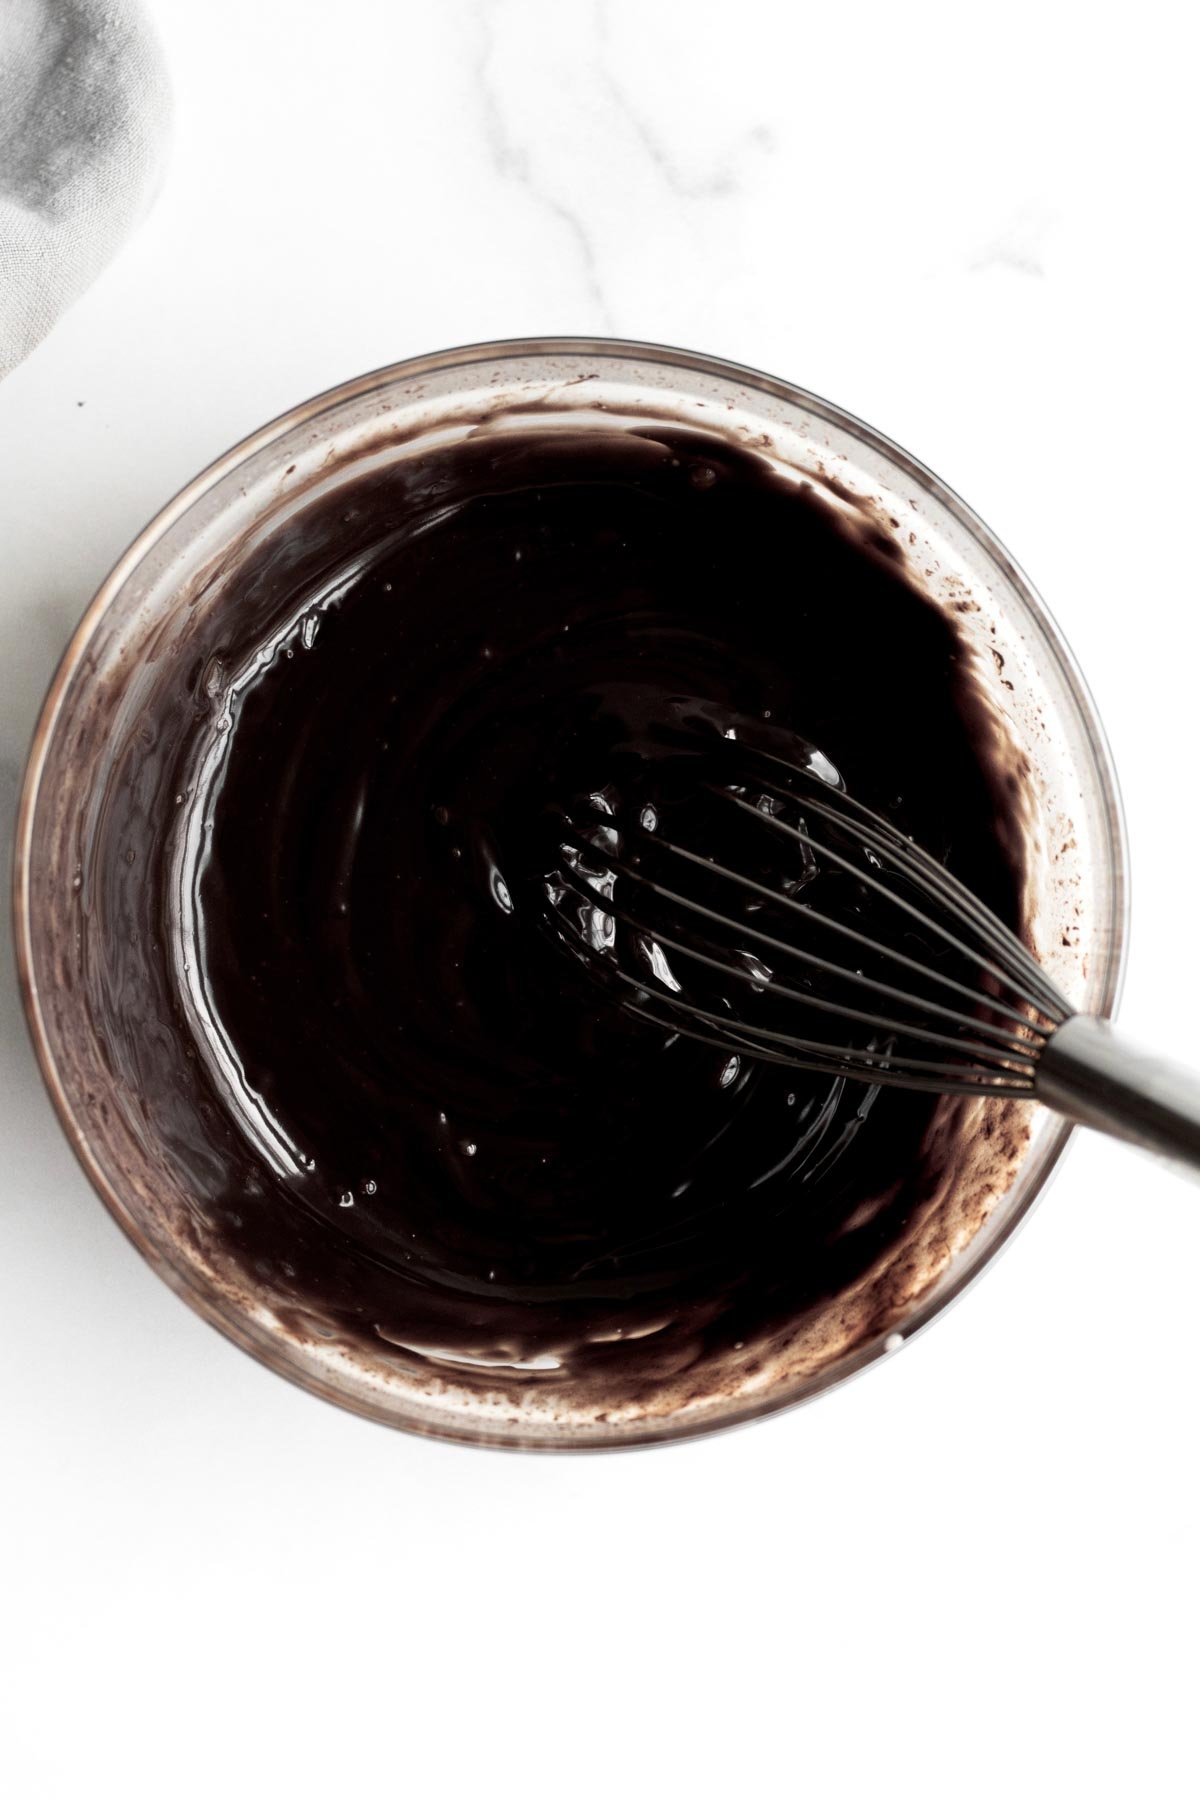 Melted chocolate in a glass bowl with a whisk.